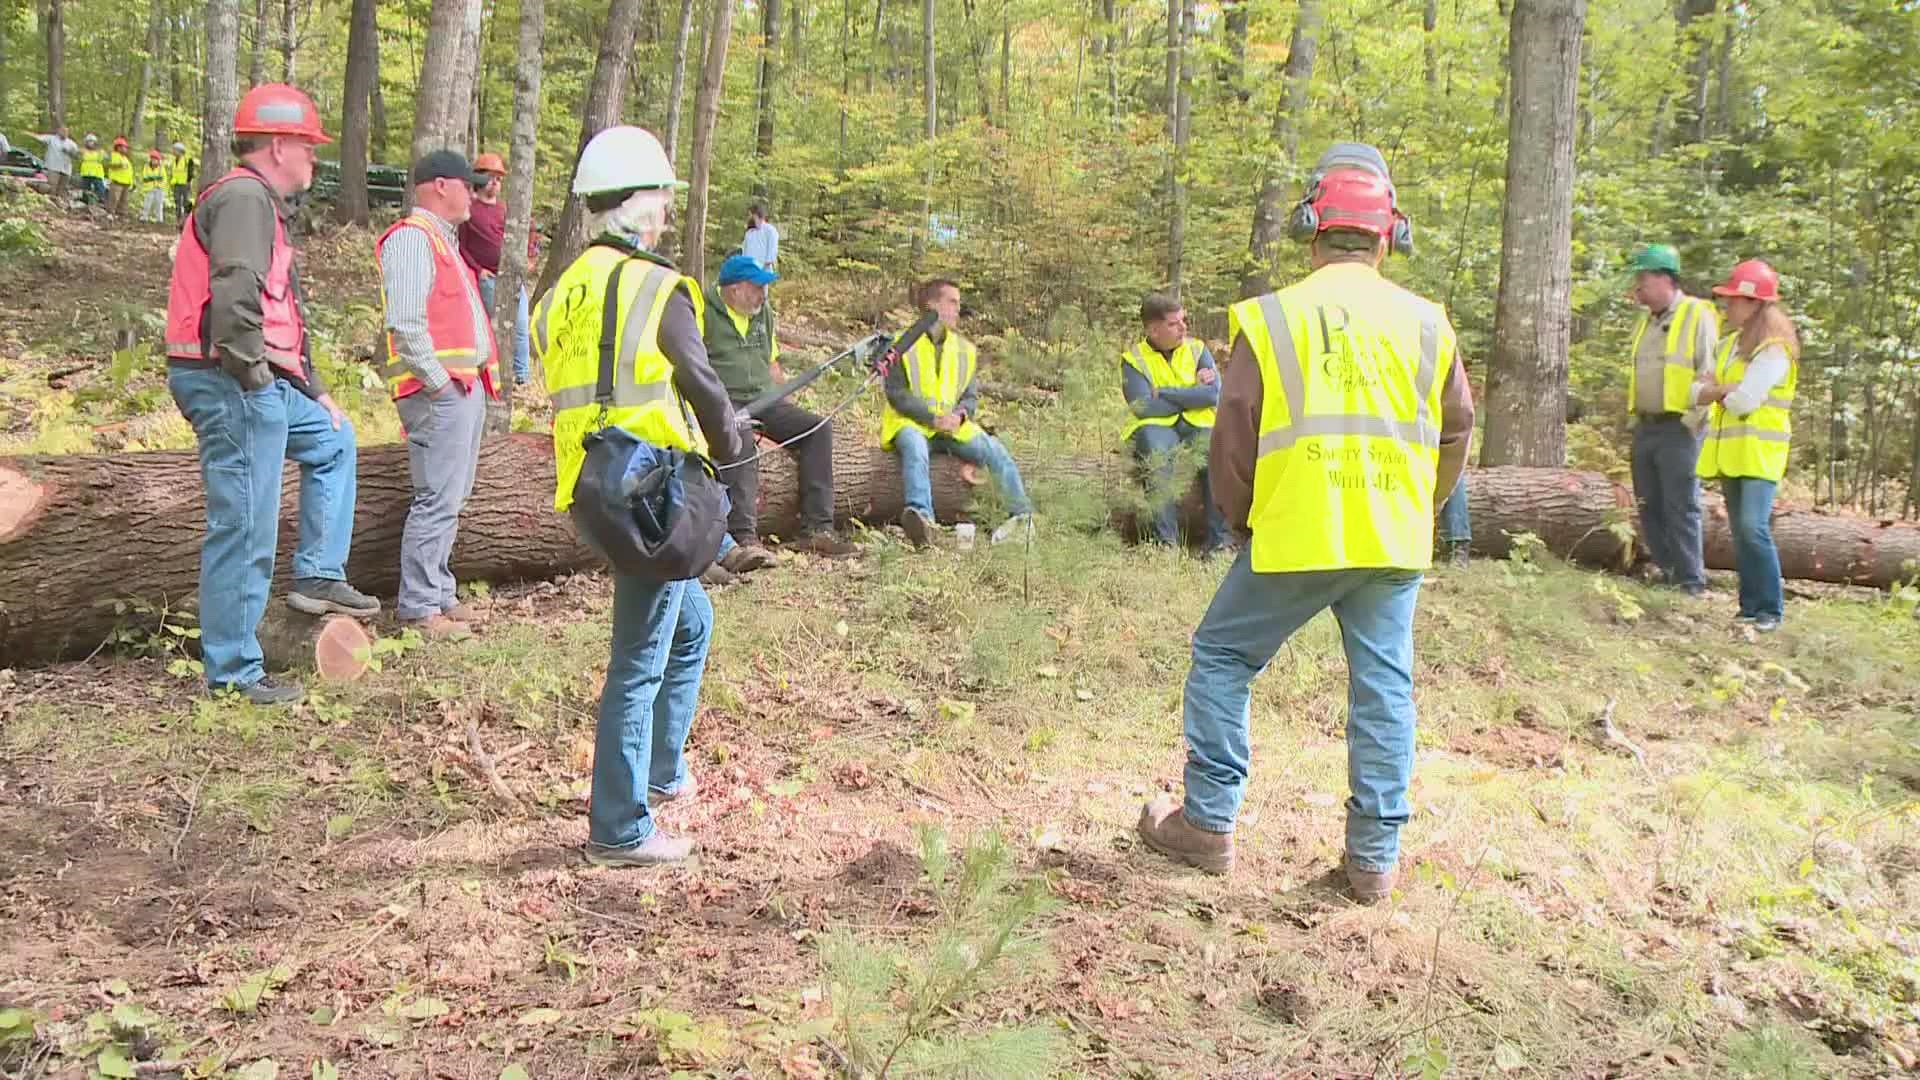 The group discussed training initiatives for loggers, as well as some of the workforce challenges the industry is facing.